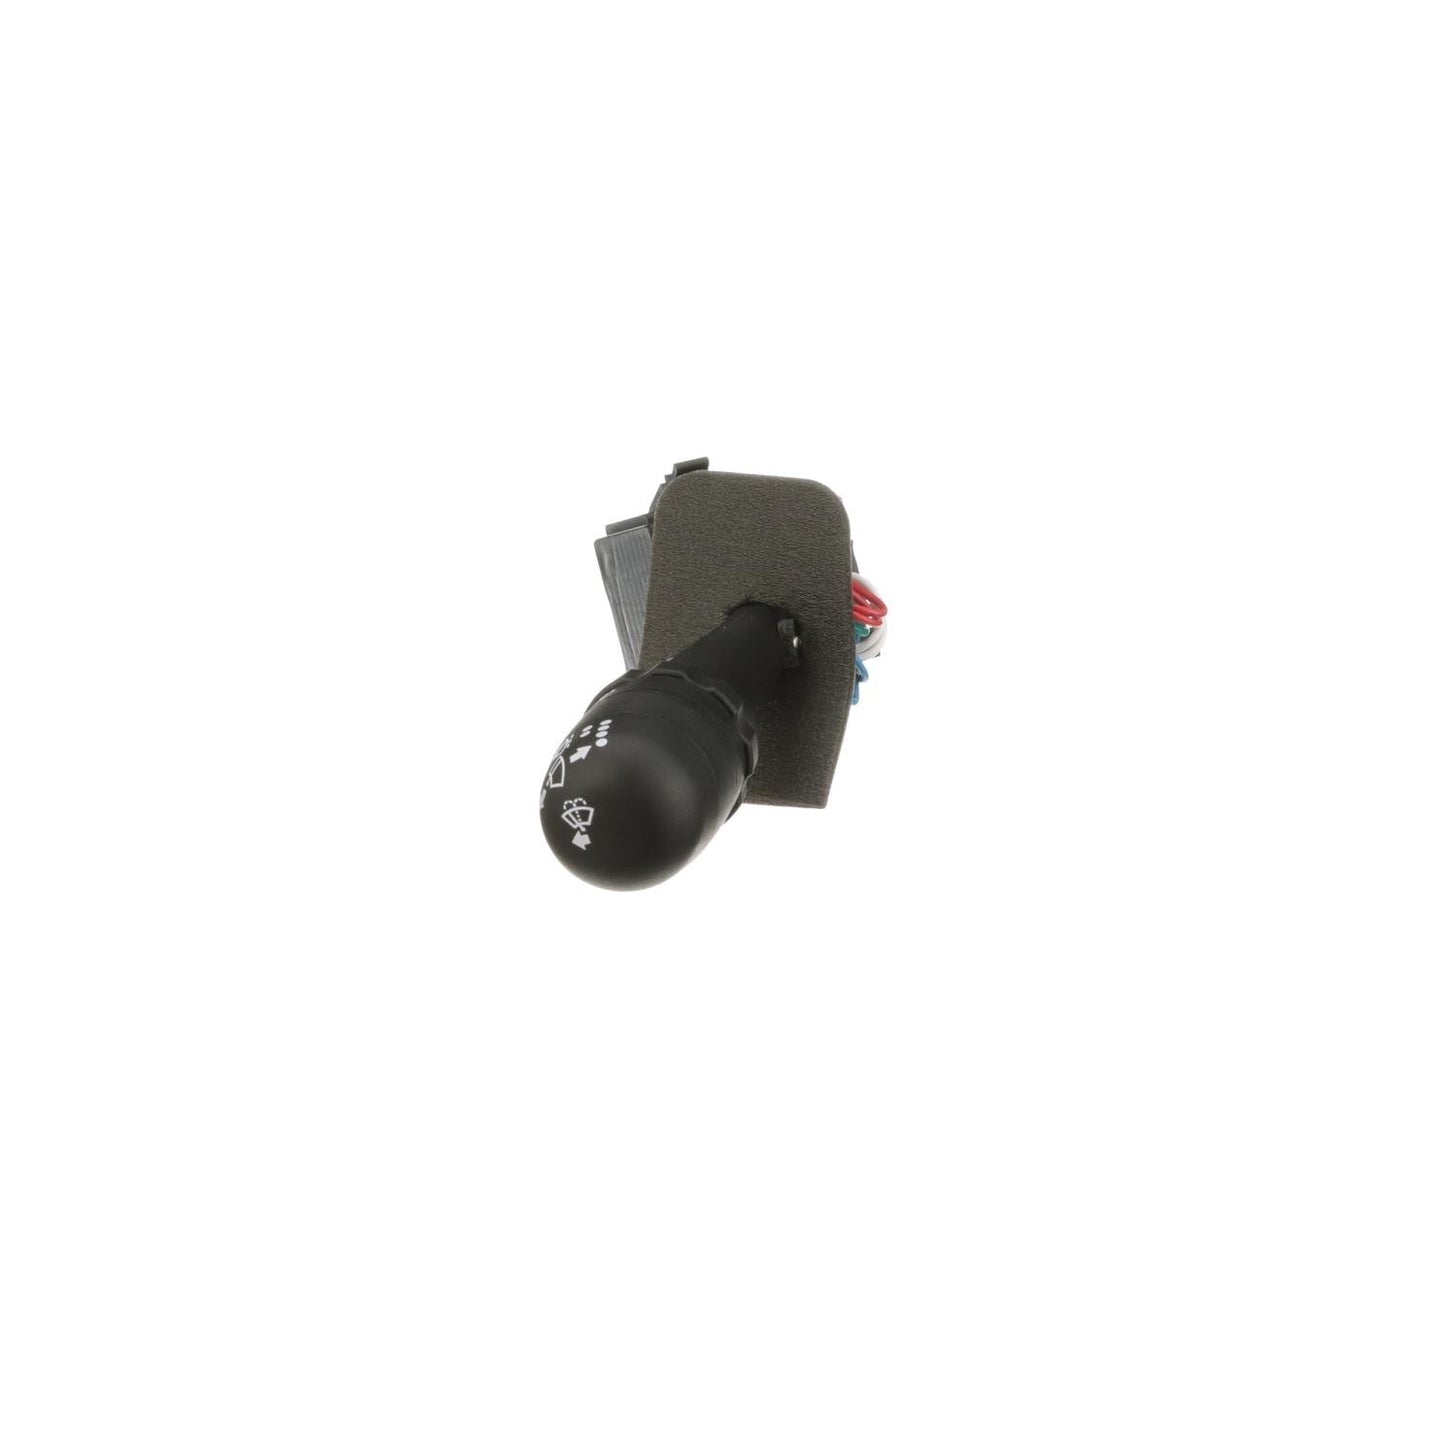 Left View of Windshield Wiper Switch STANDARD IGNITION WP-308